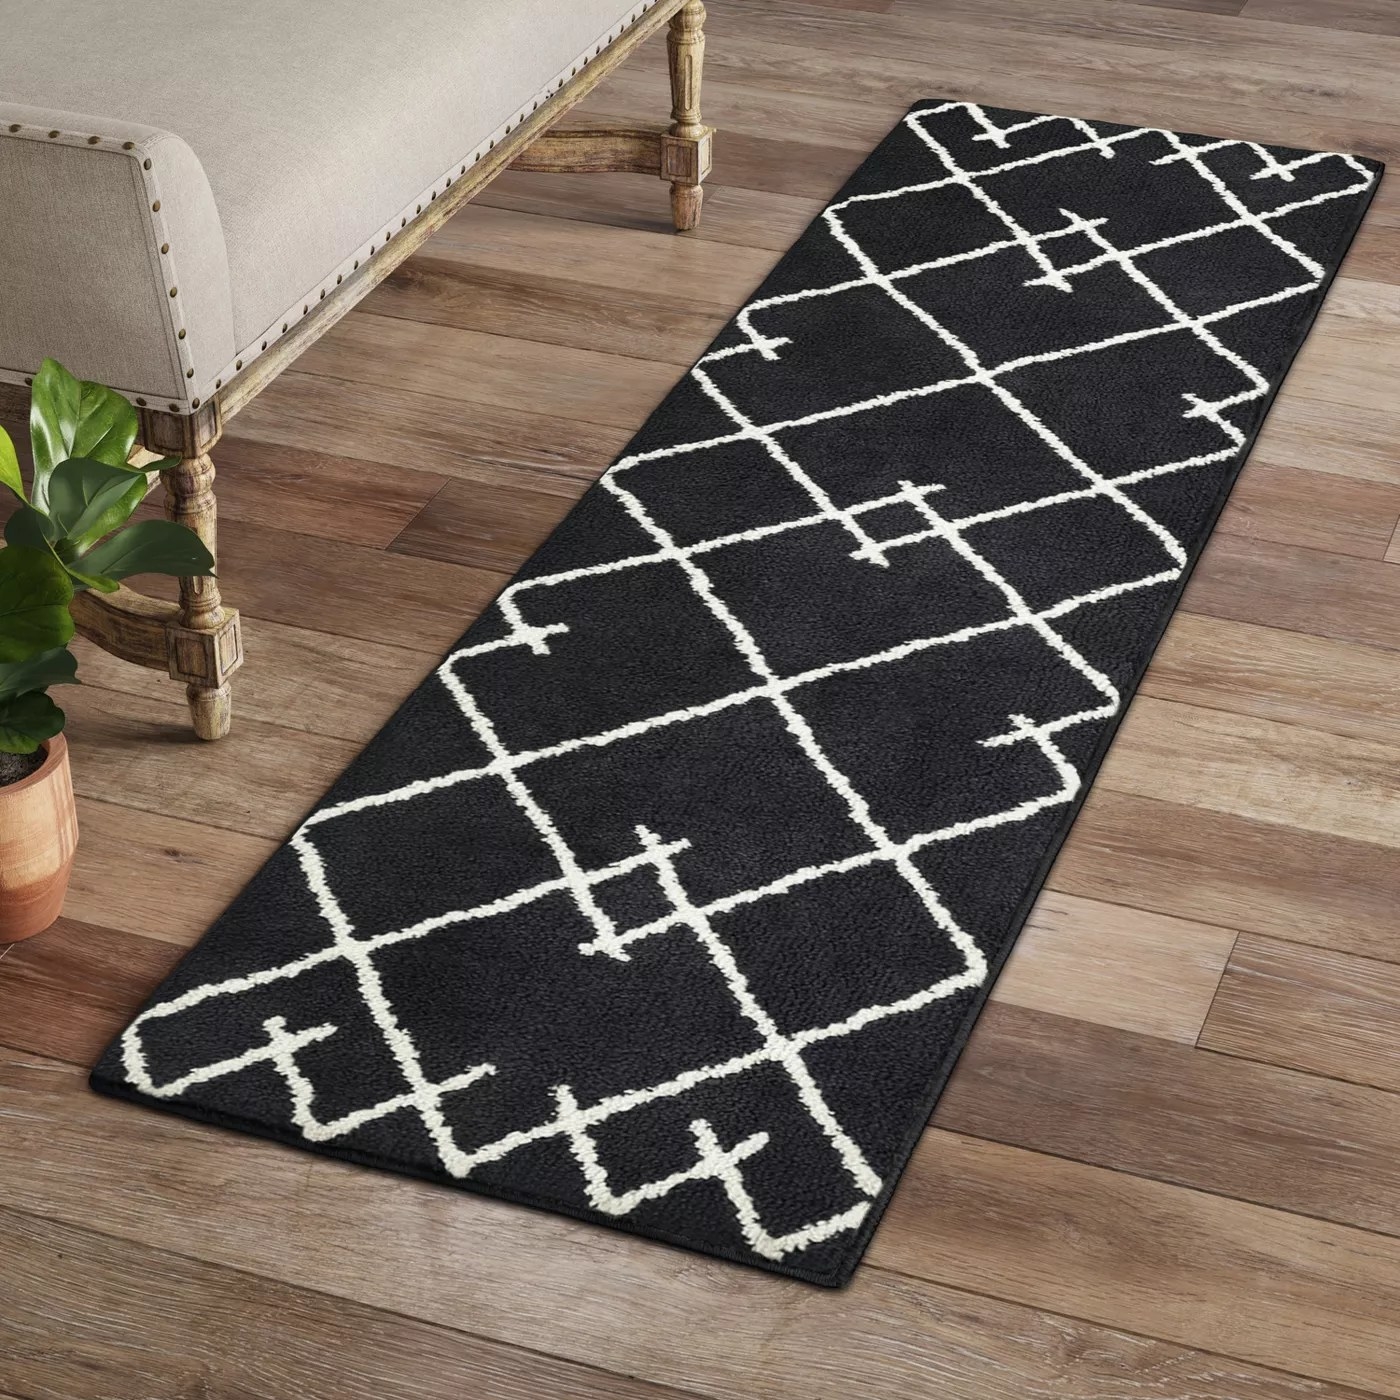 The black and white runner with a geometric pattern in an entryway